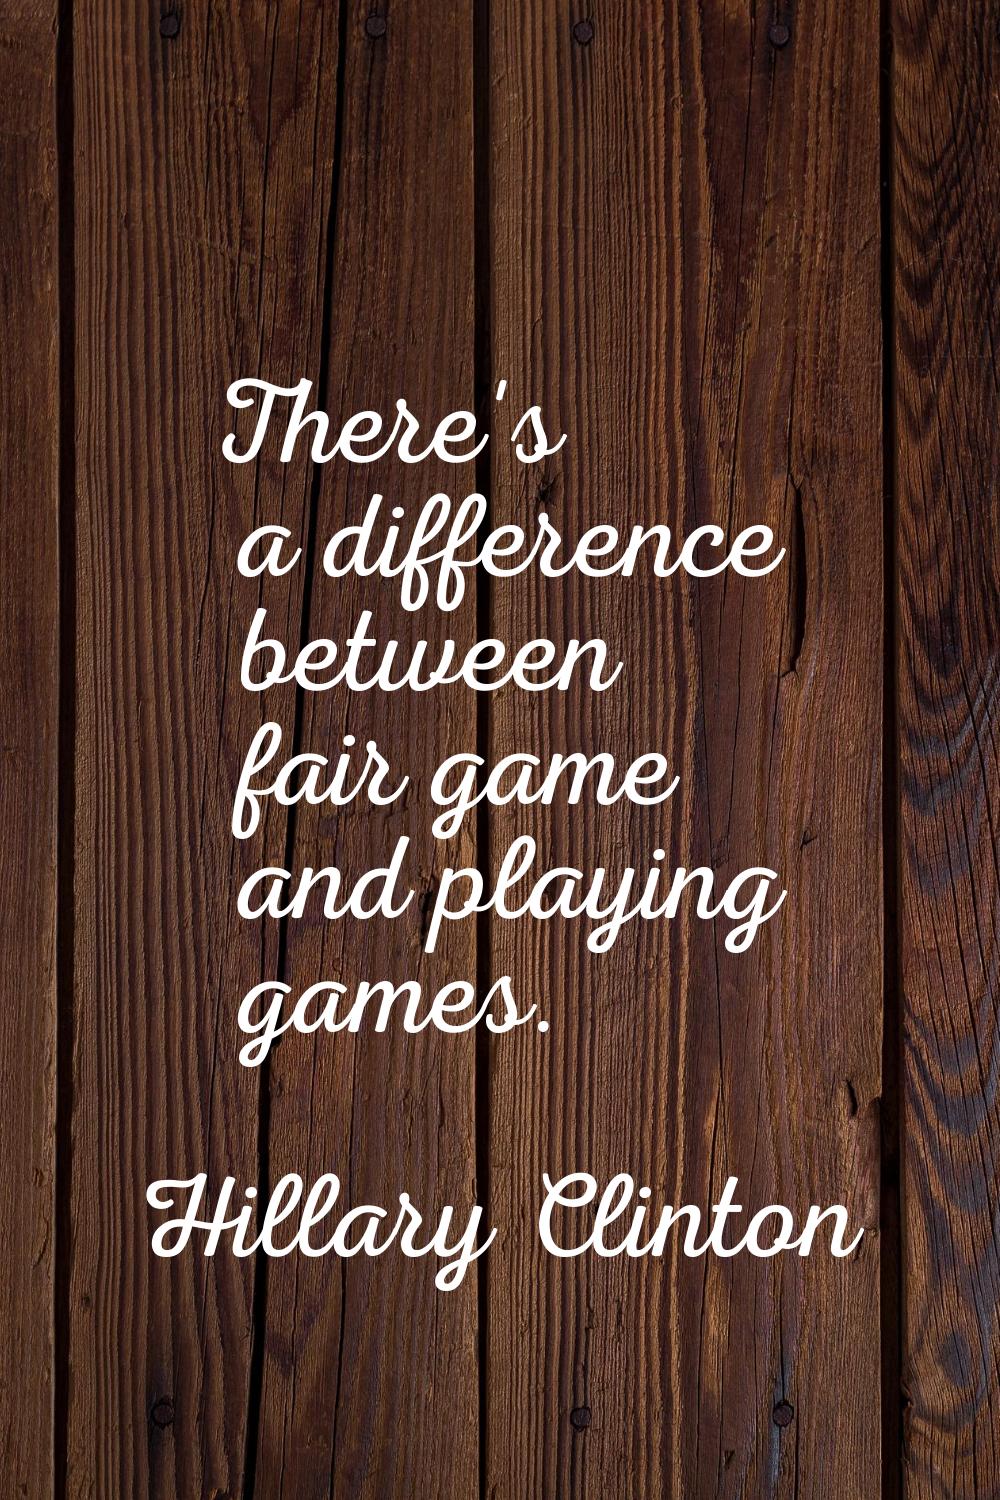 There's a difference between fair game and playing games.